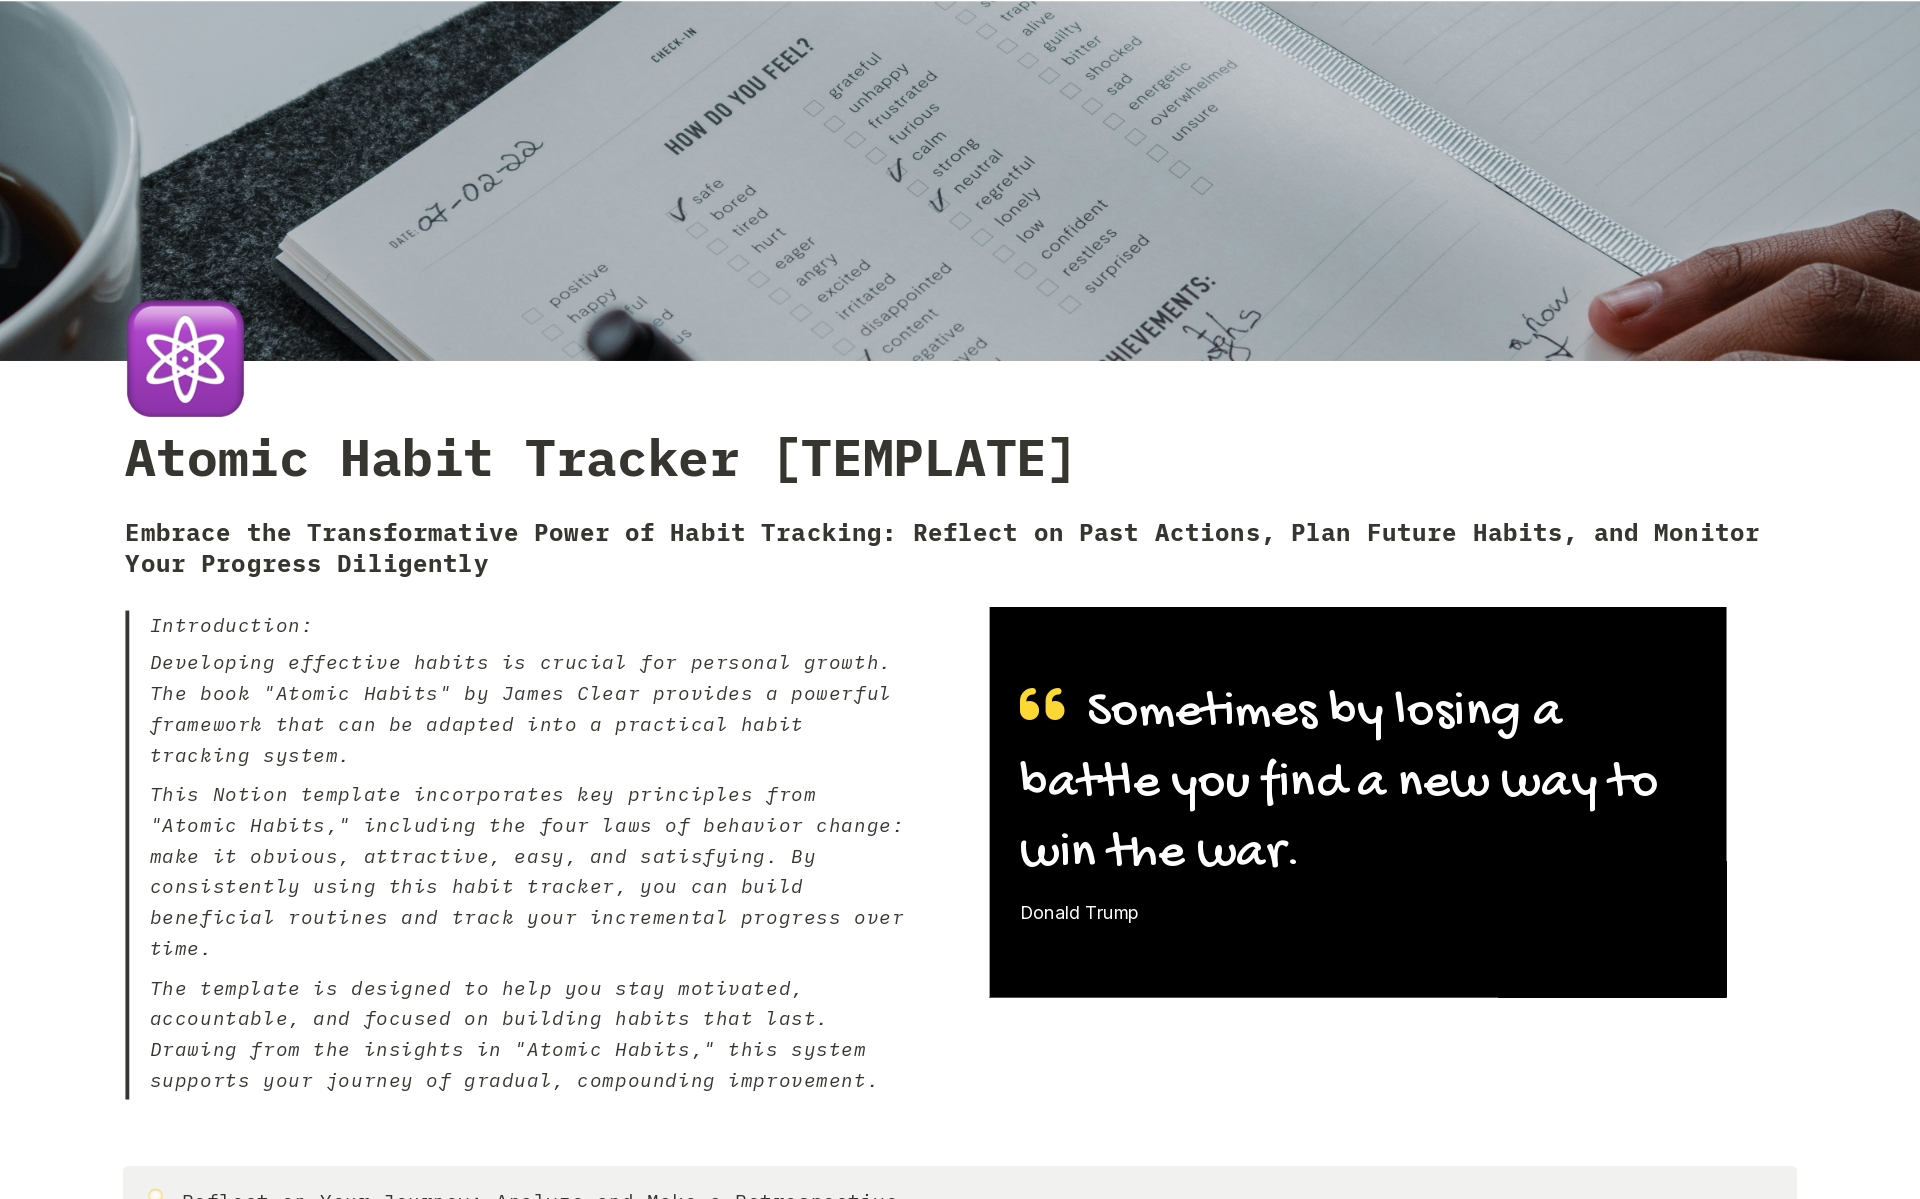 Introducing the "Smart and Minimalistic Habit Tracker" Notion Template, a carefully designed tool to help you build, track, and maintain your habits effectively, following the insightful recommendations from the renowned book "Atomic Habits" by James Clear.